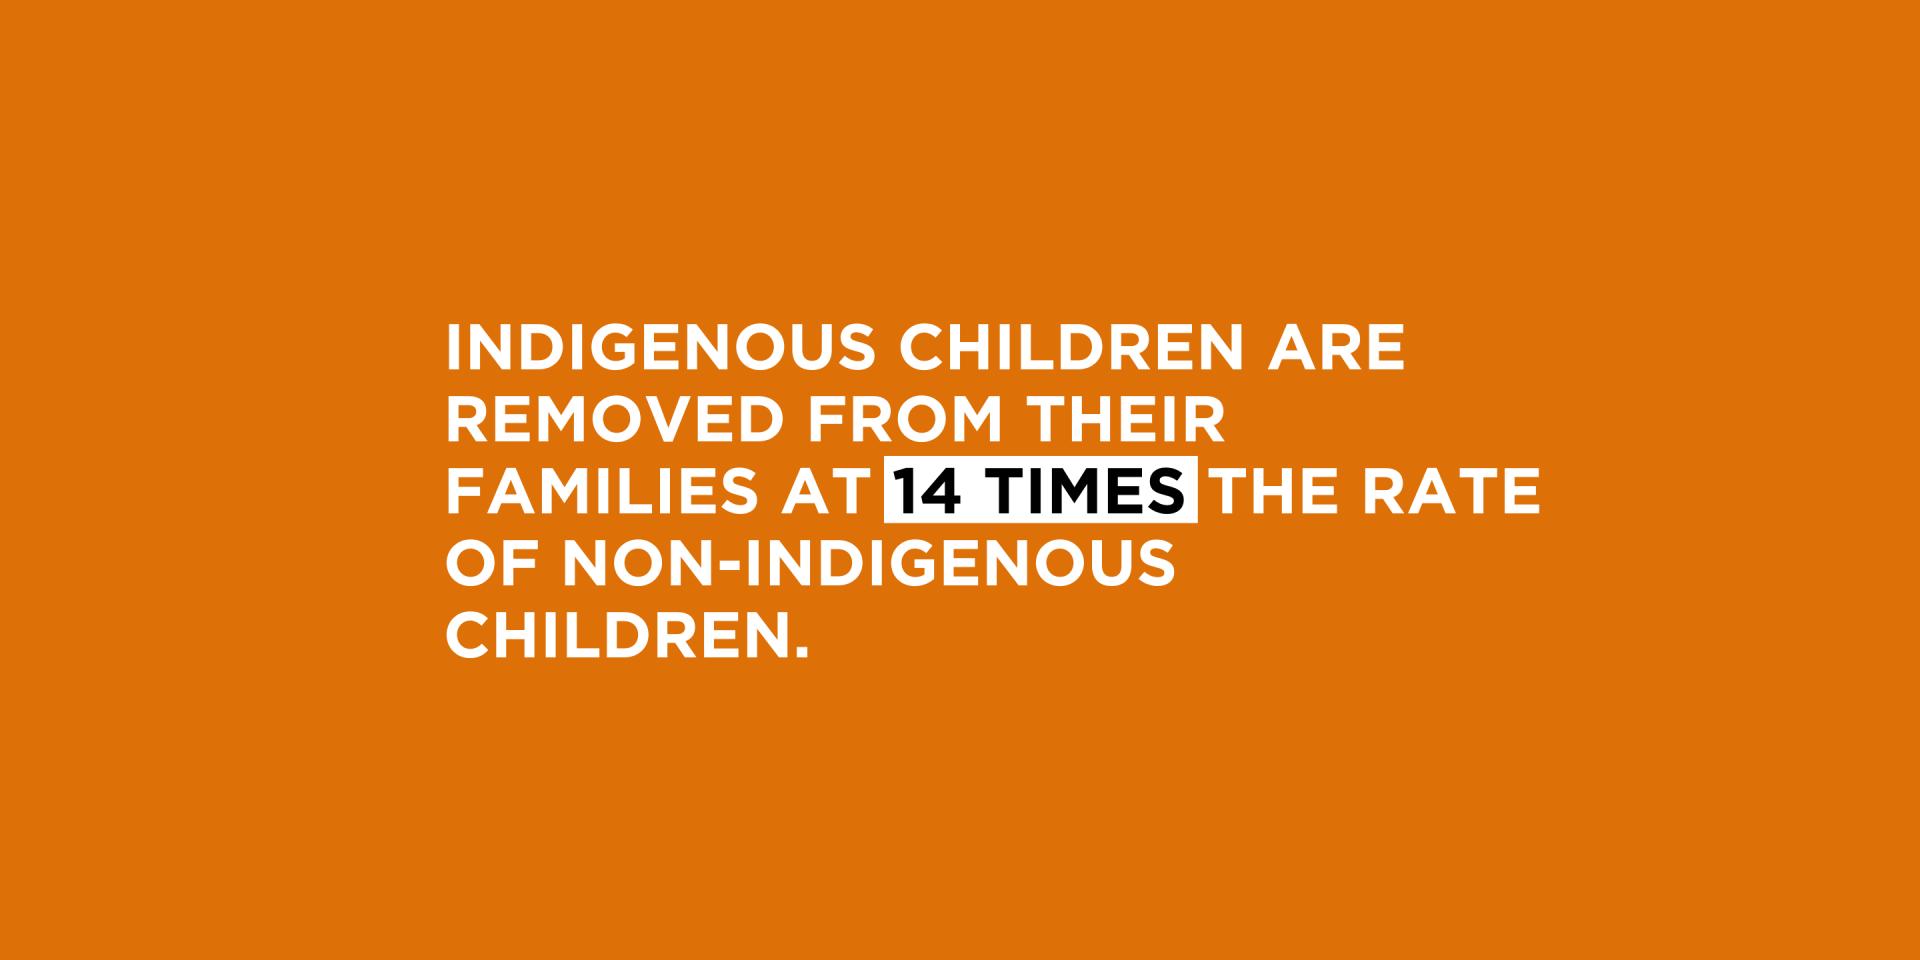 Text: Indigenous children are removed from their families at 14 times the rate of non-Indigenous children.